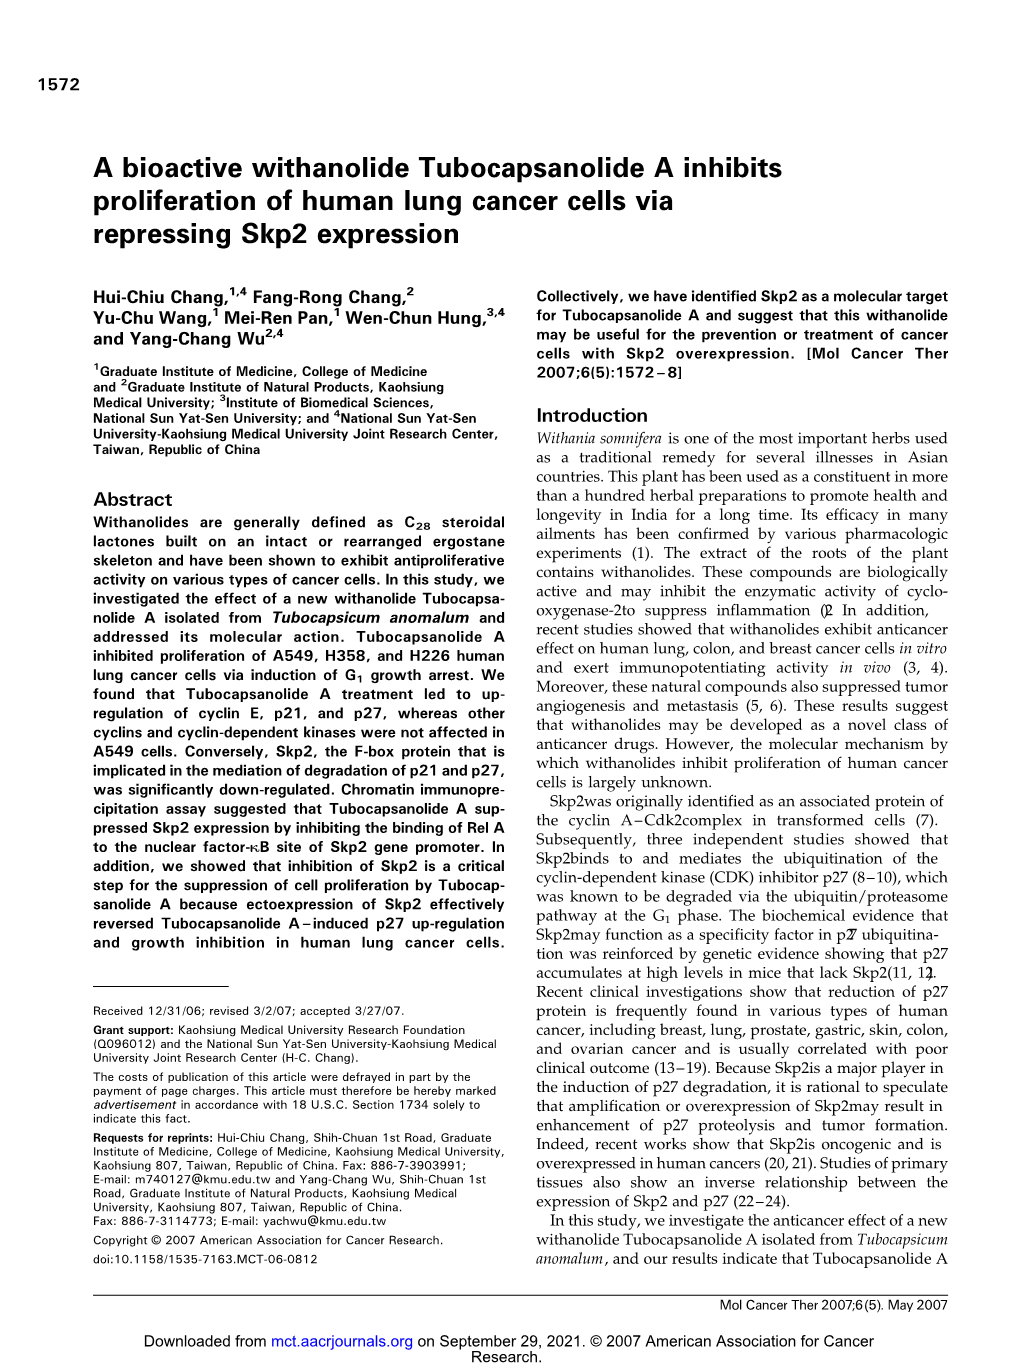 A Bioactive Withanolide Tubocapsanolide a Inhibits Proliferation of Human Lung Cancer Cells Via Repressing Skp2 Expression